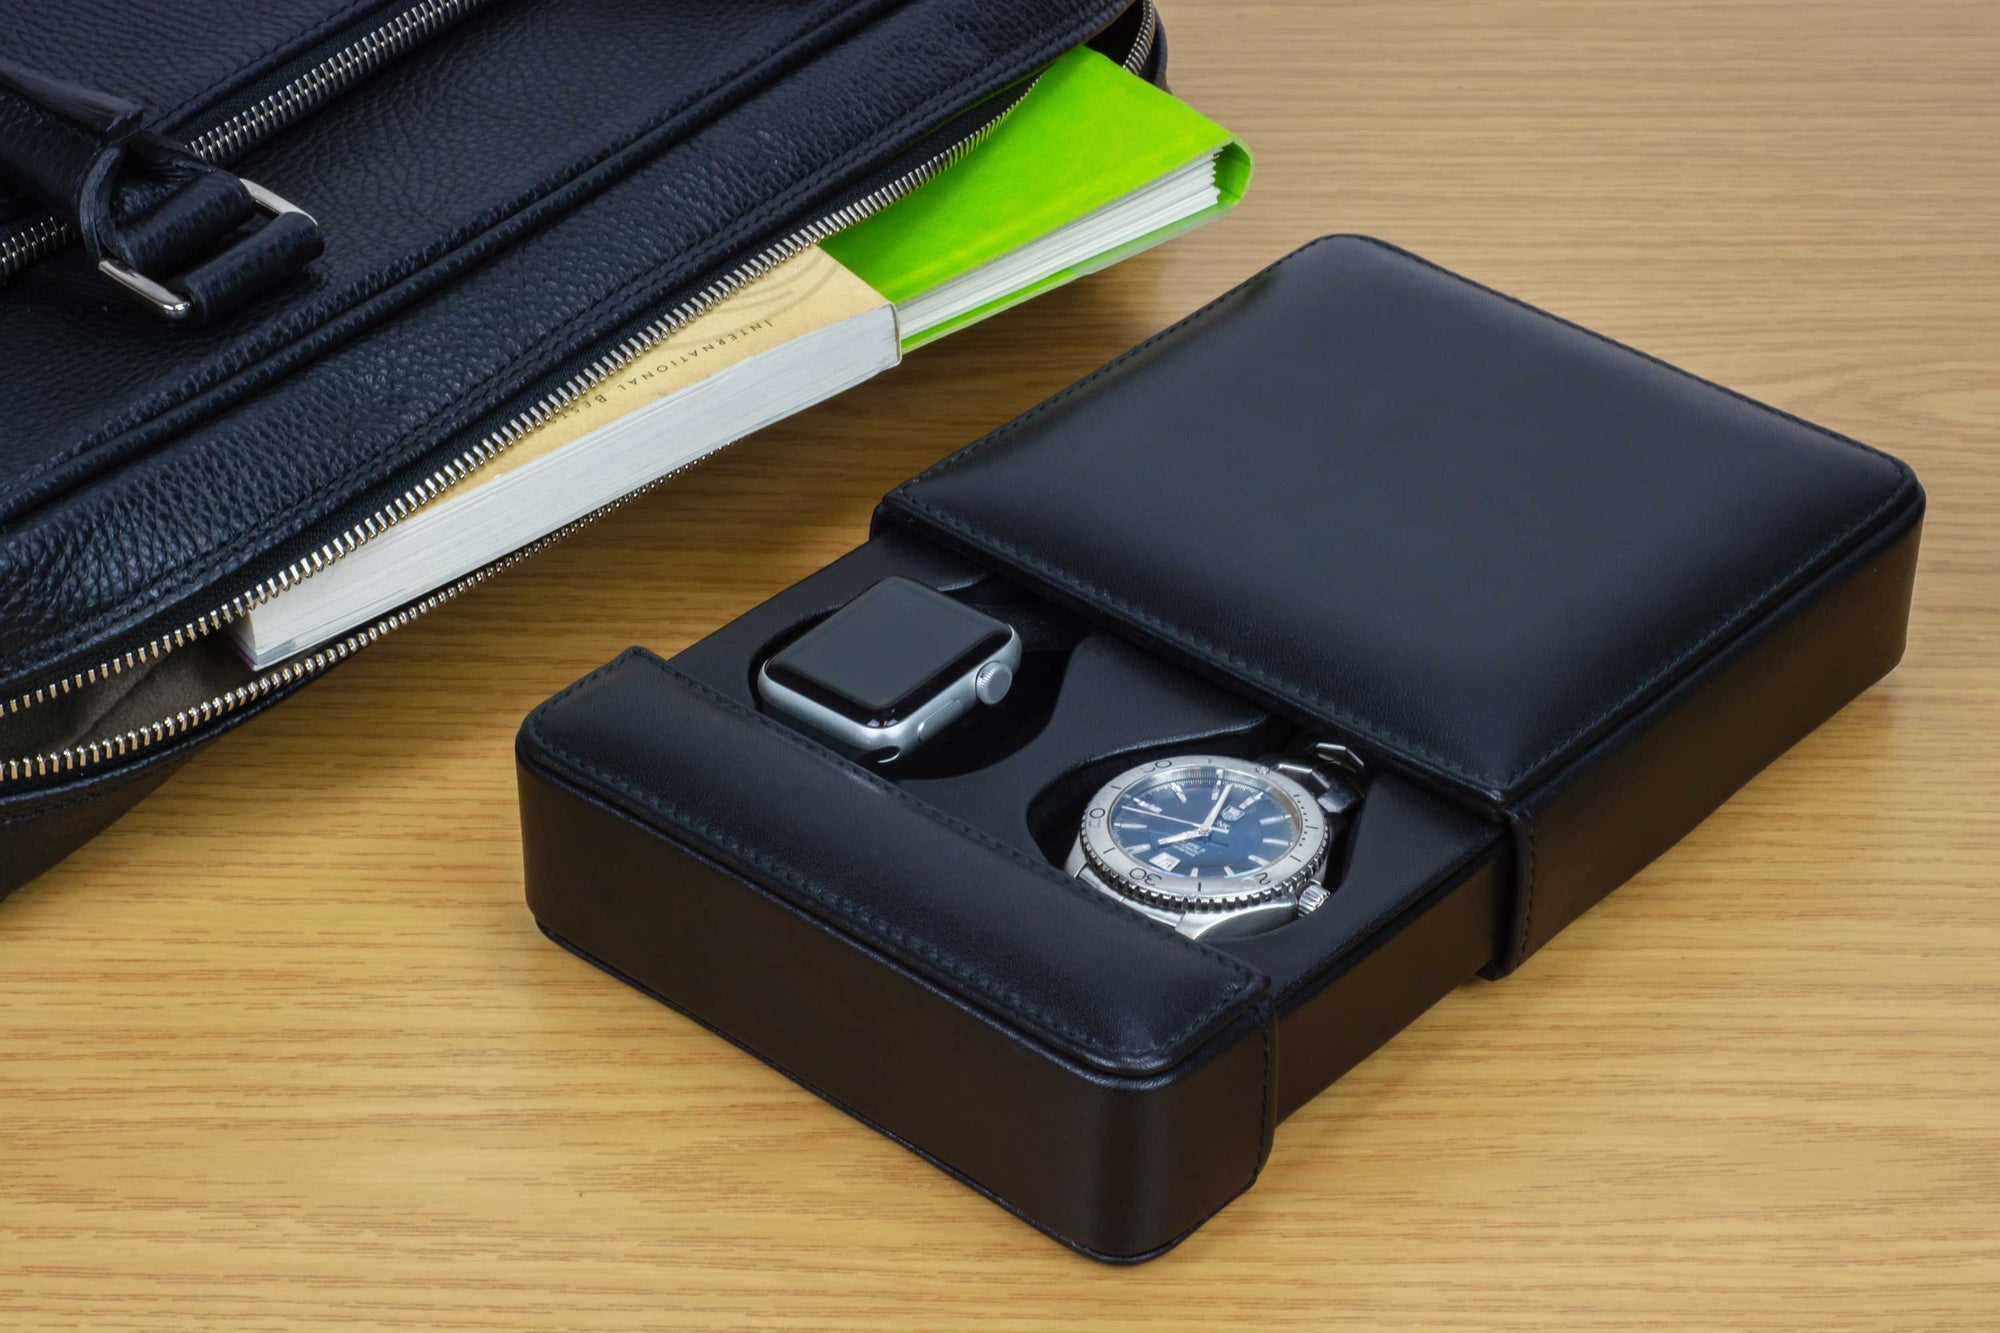 DiLoro Italian Leather Double Travel Men's Watch Box Case Holder in Black - Lifestyle Image